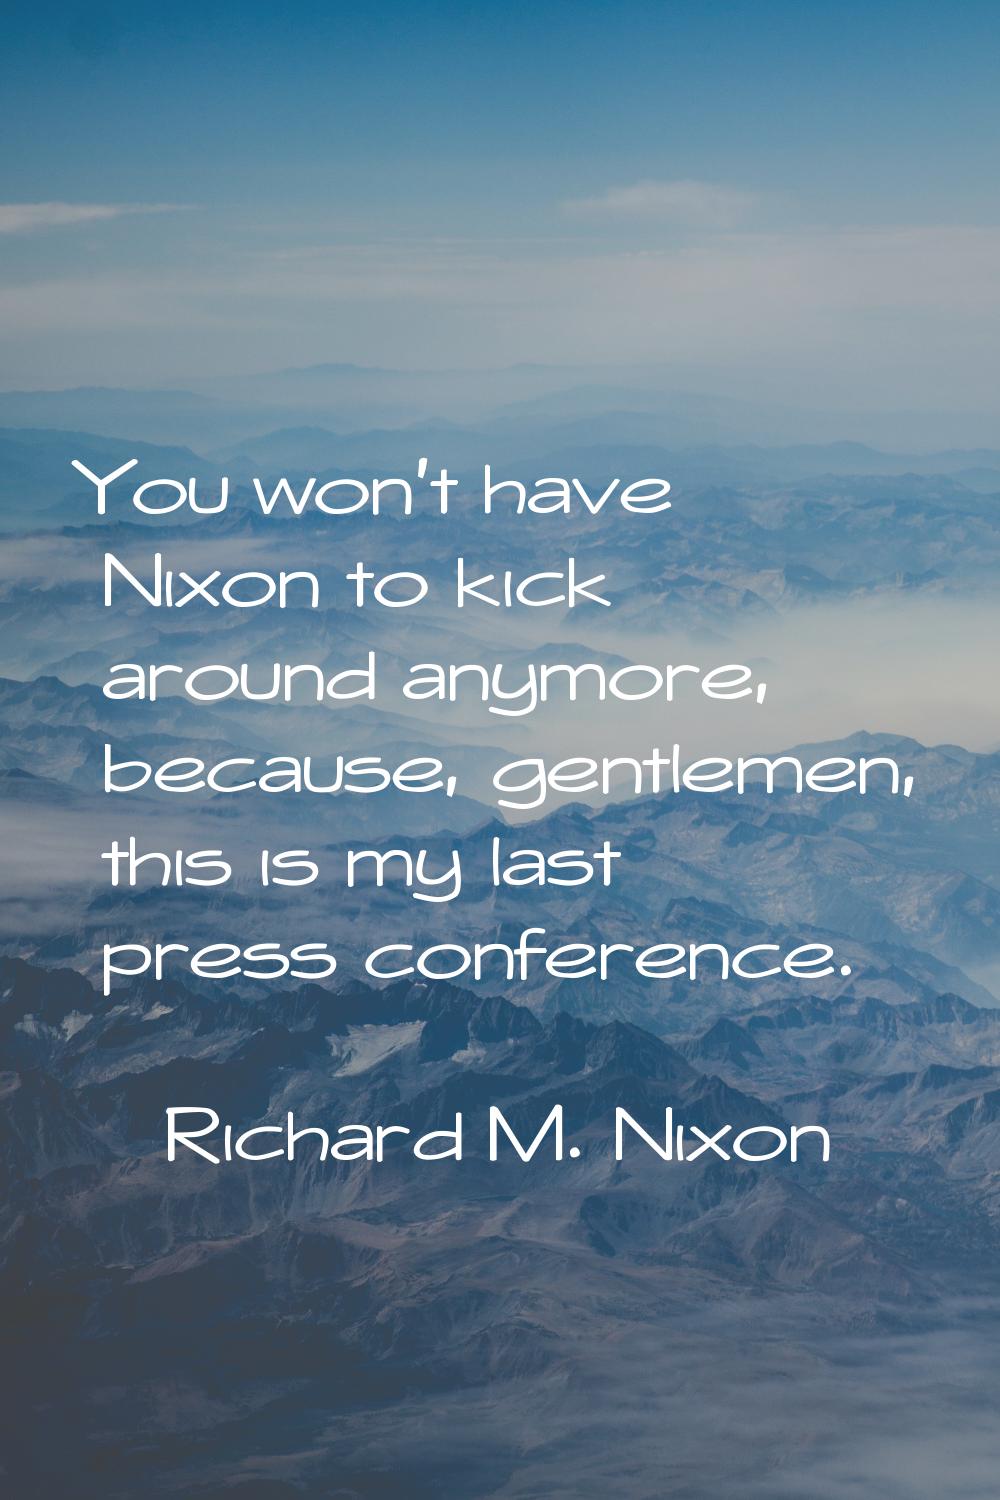 You won't have Nixon to kick around anymore, because, gentlemen, this is my last press conference.